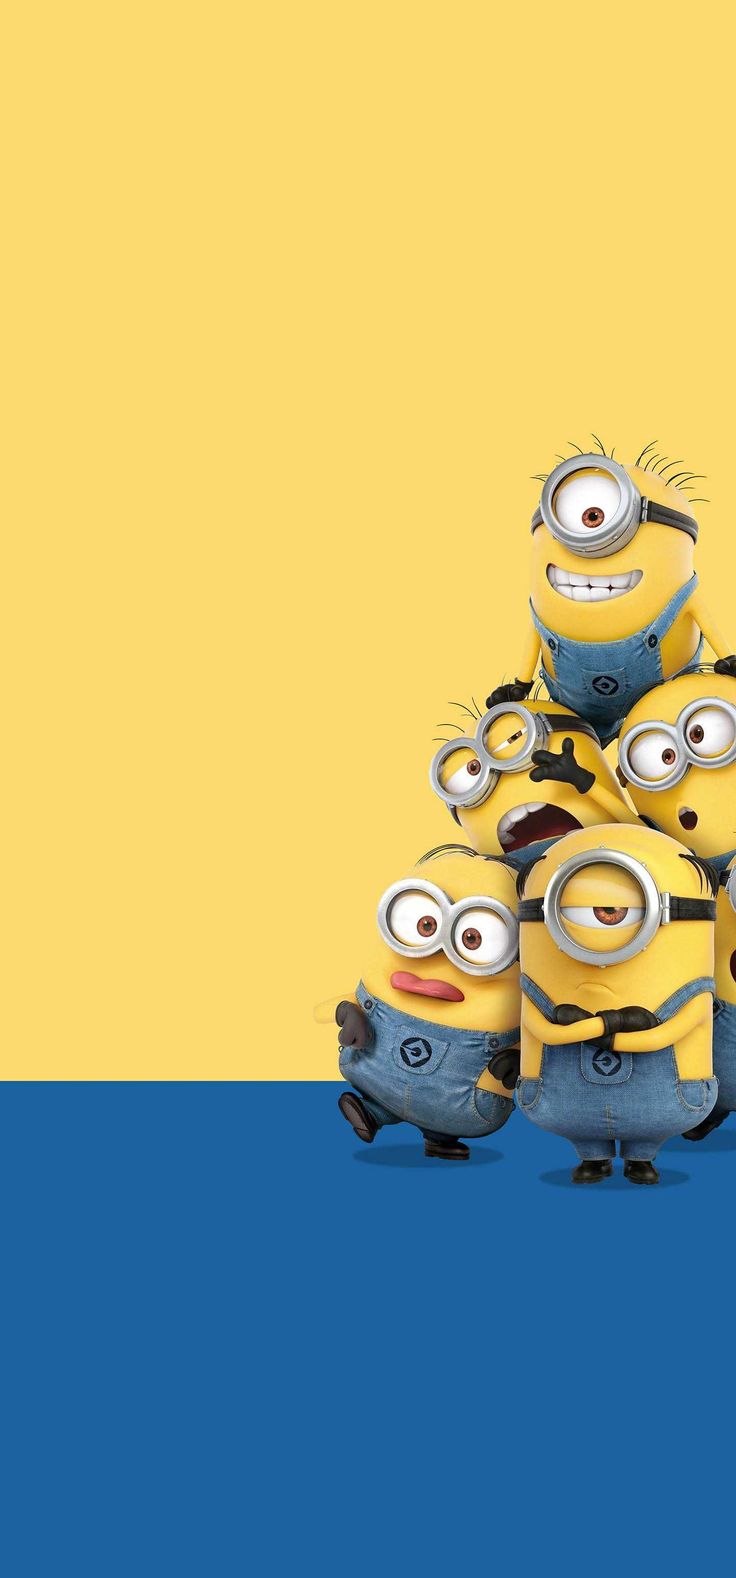 Minions wallpaper discover more despicable me film minion minions wallpaper httpswwwixâ cute minions wallpaper minions wallpaper minion wallpaper iphone